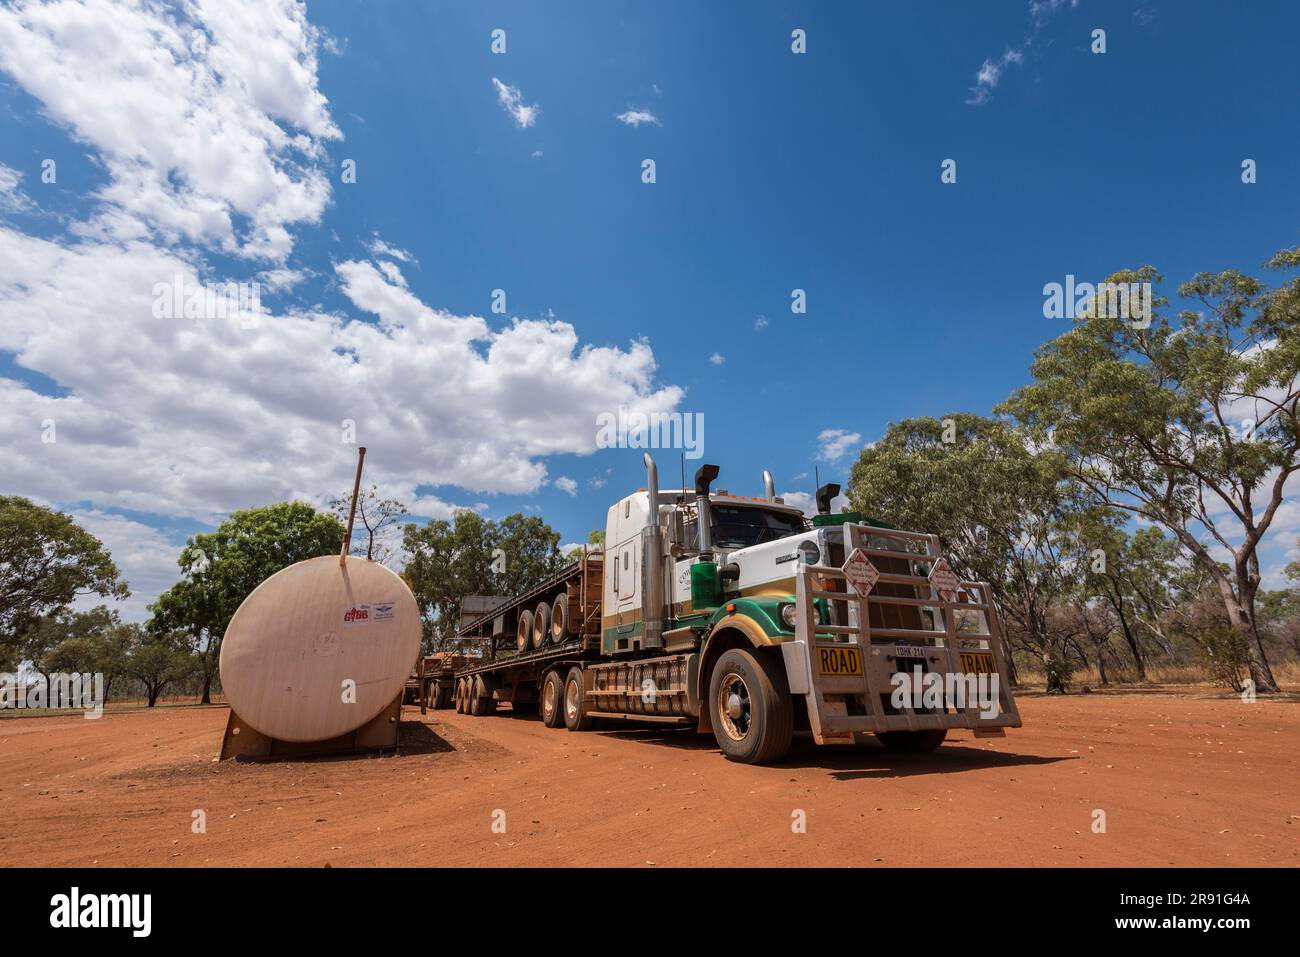 A road train waits on the red soil at the road house in Mount Barnett in Western Australia Stock Photo